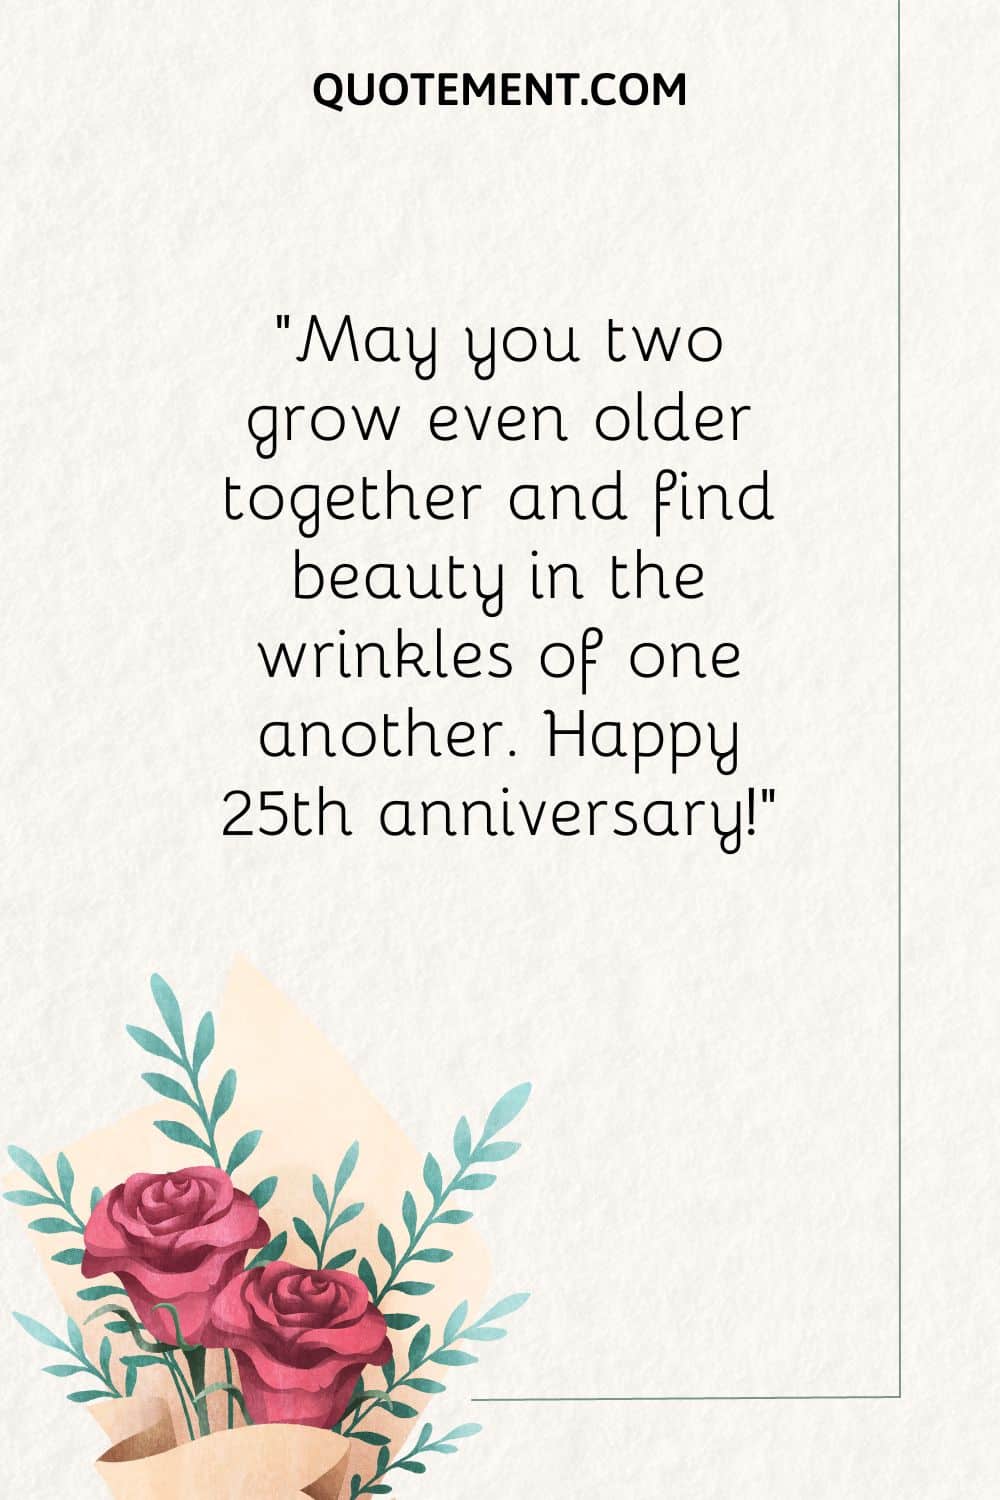 May you two grow even older together and find beauty in the wrinkles of one another.